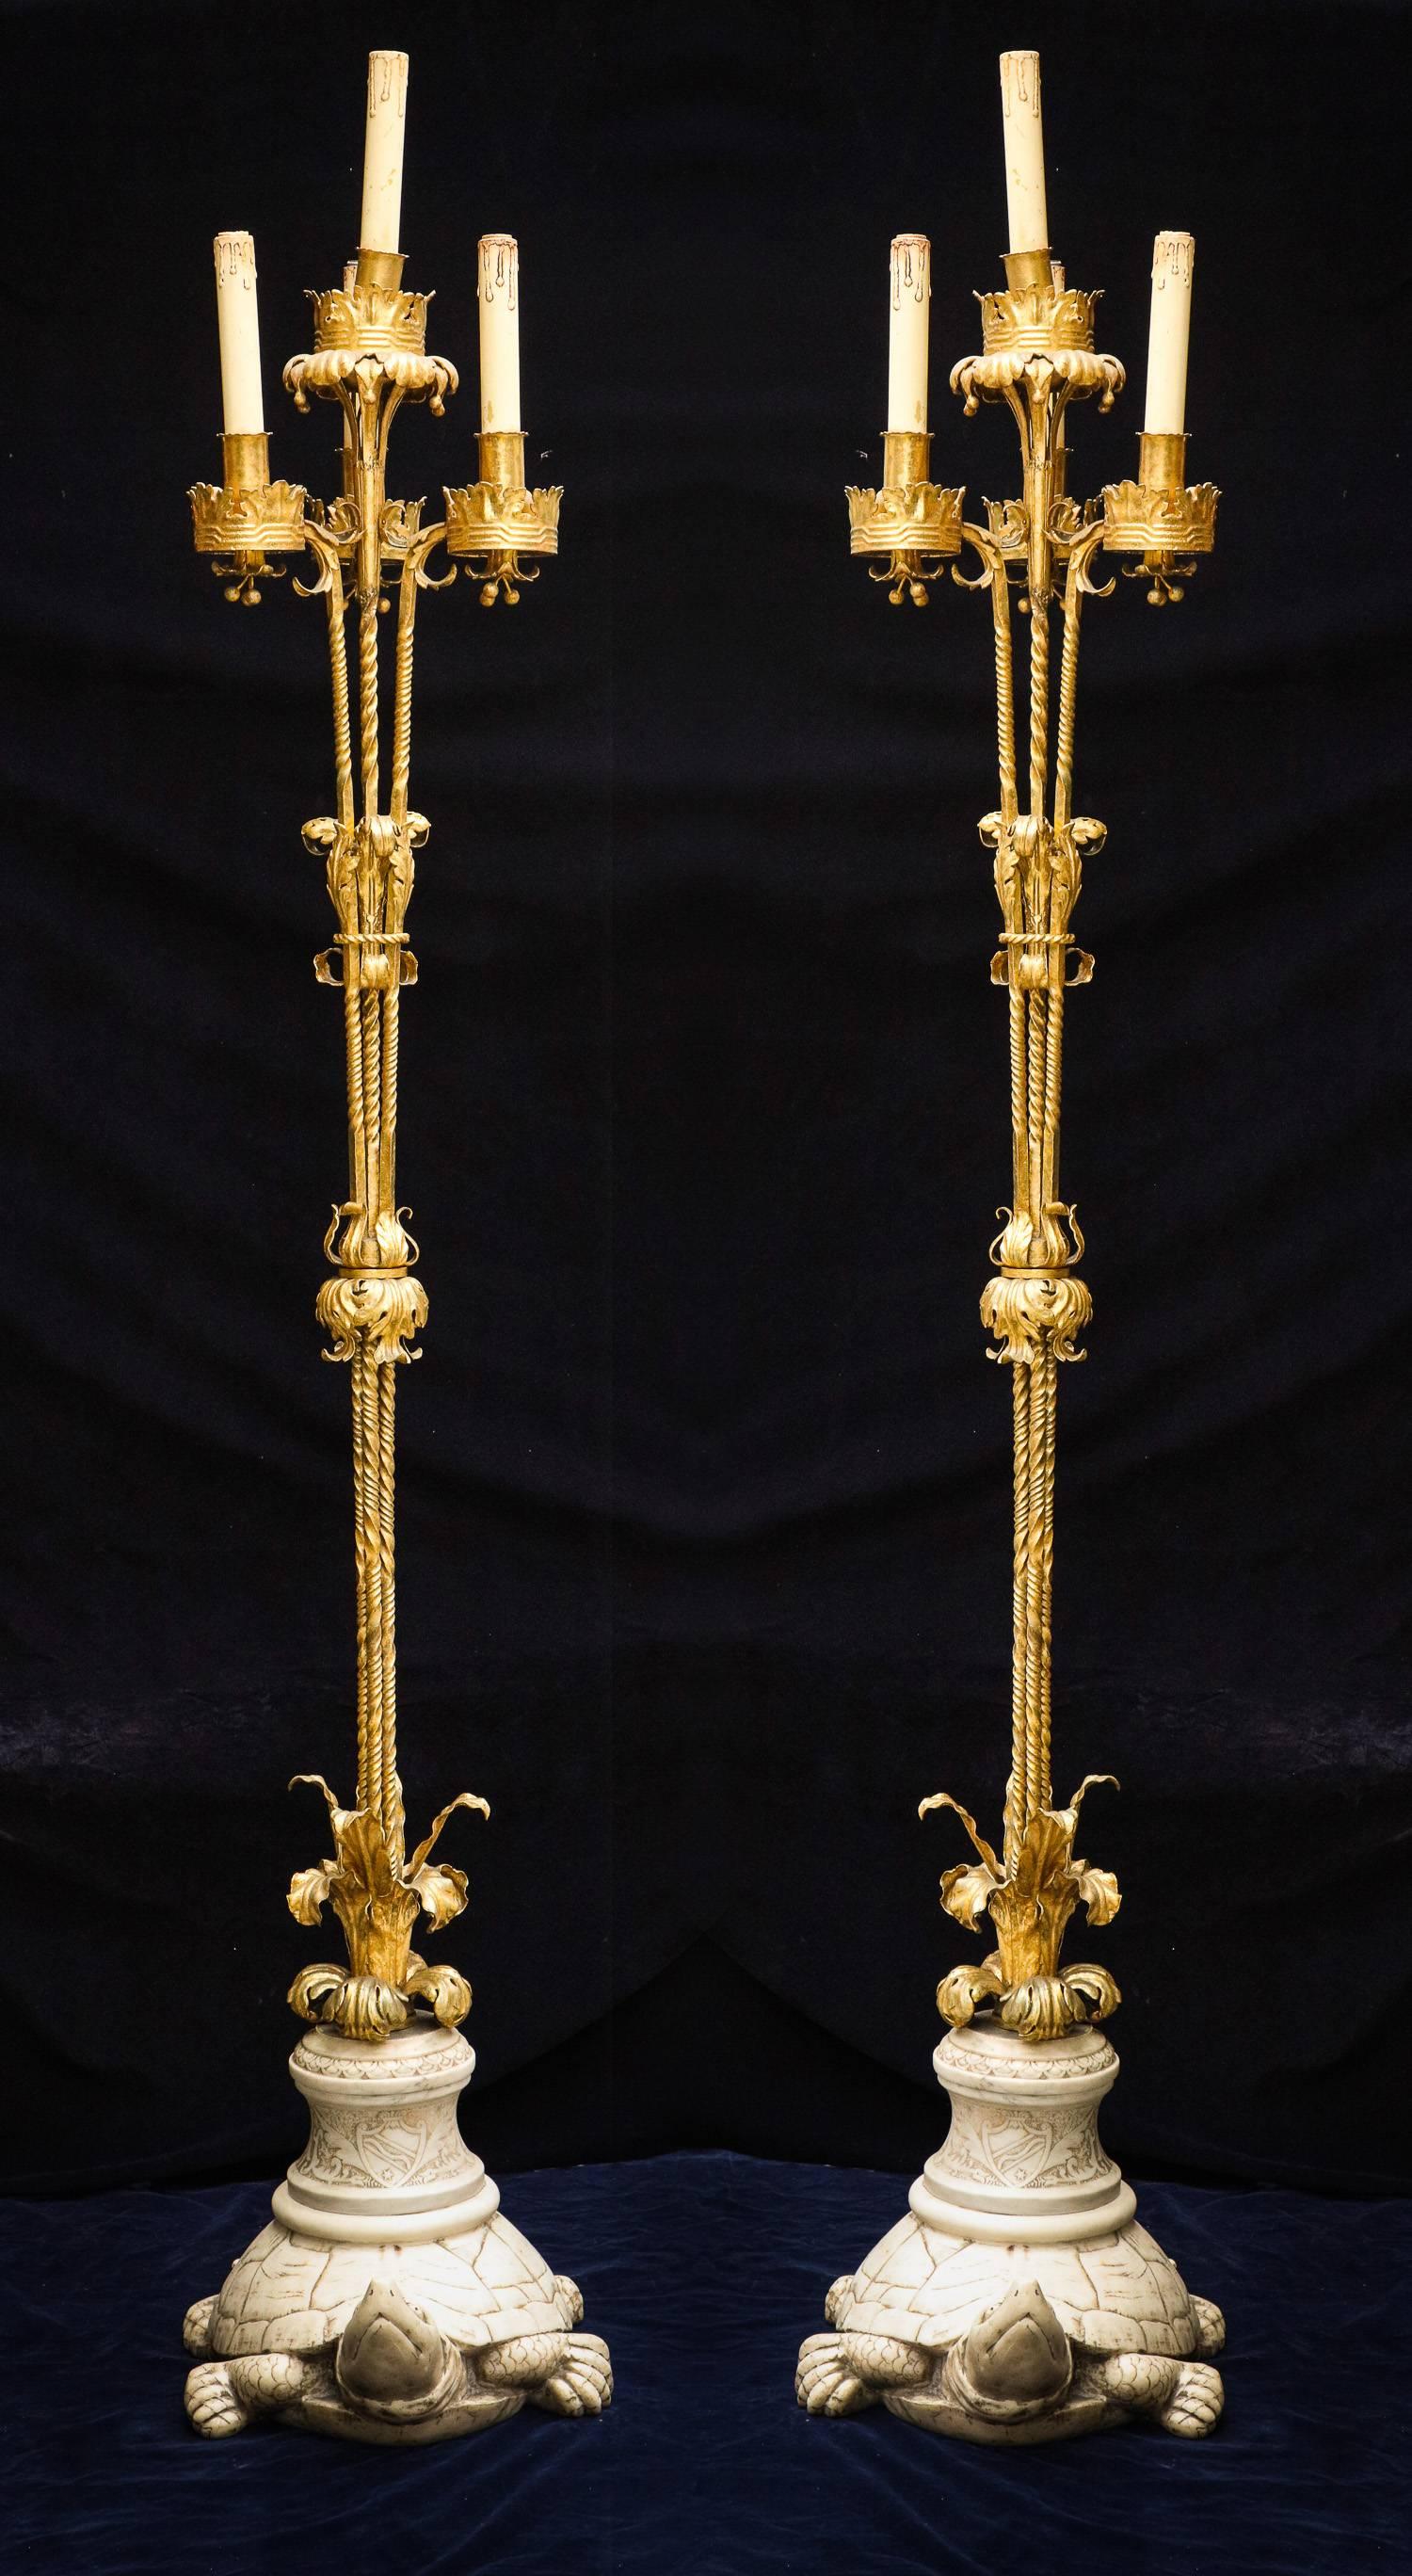 A pair of palatial and rare large antique American Louis XVI style gilt bronze and carved marble floor lamps depicting large turtles by E.F .Caldwell.